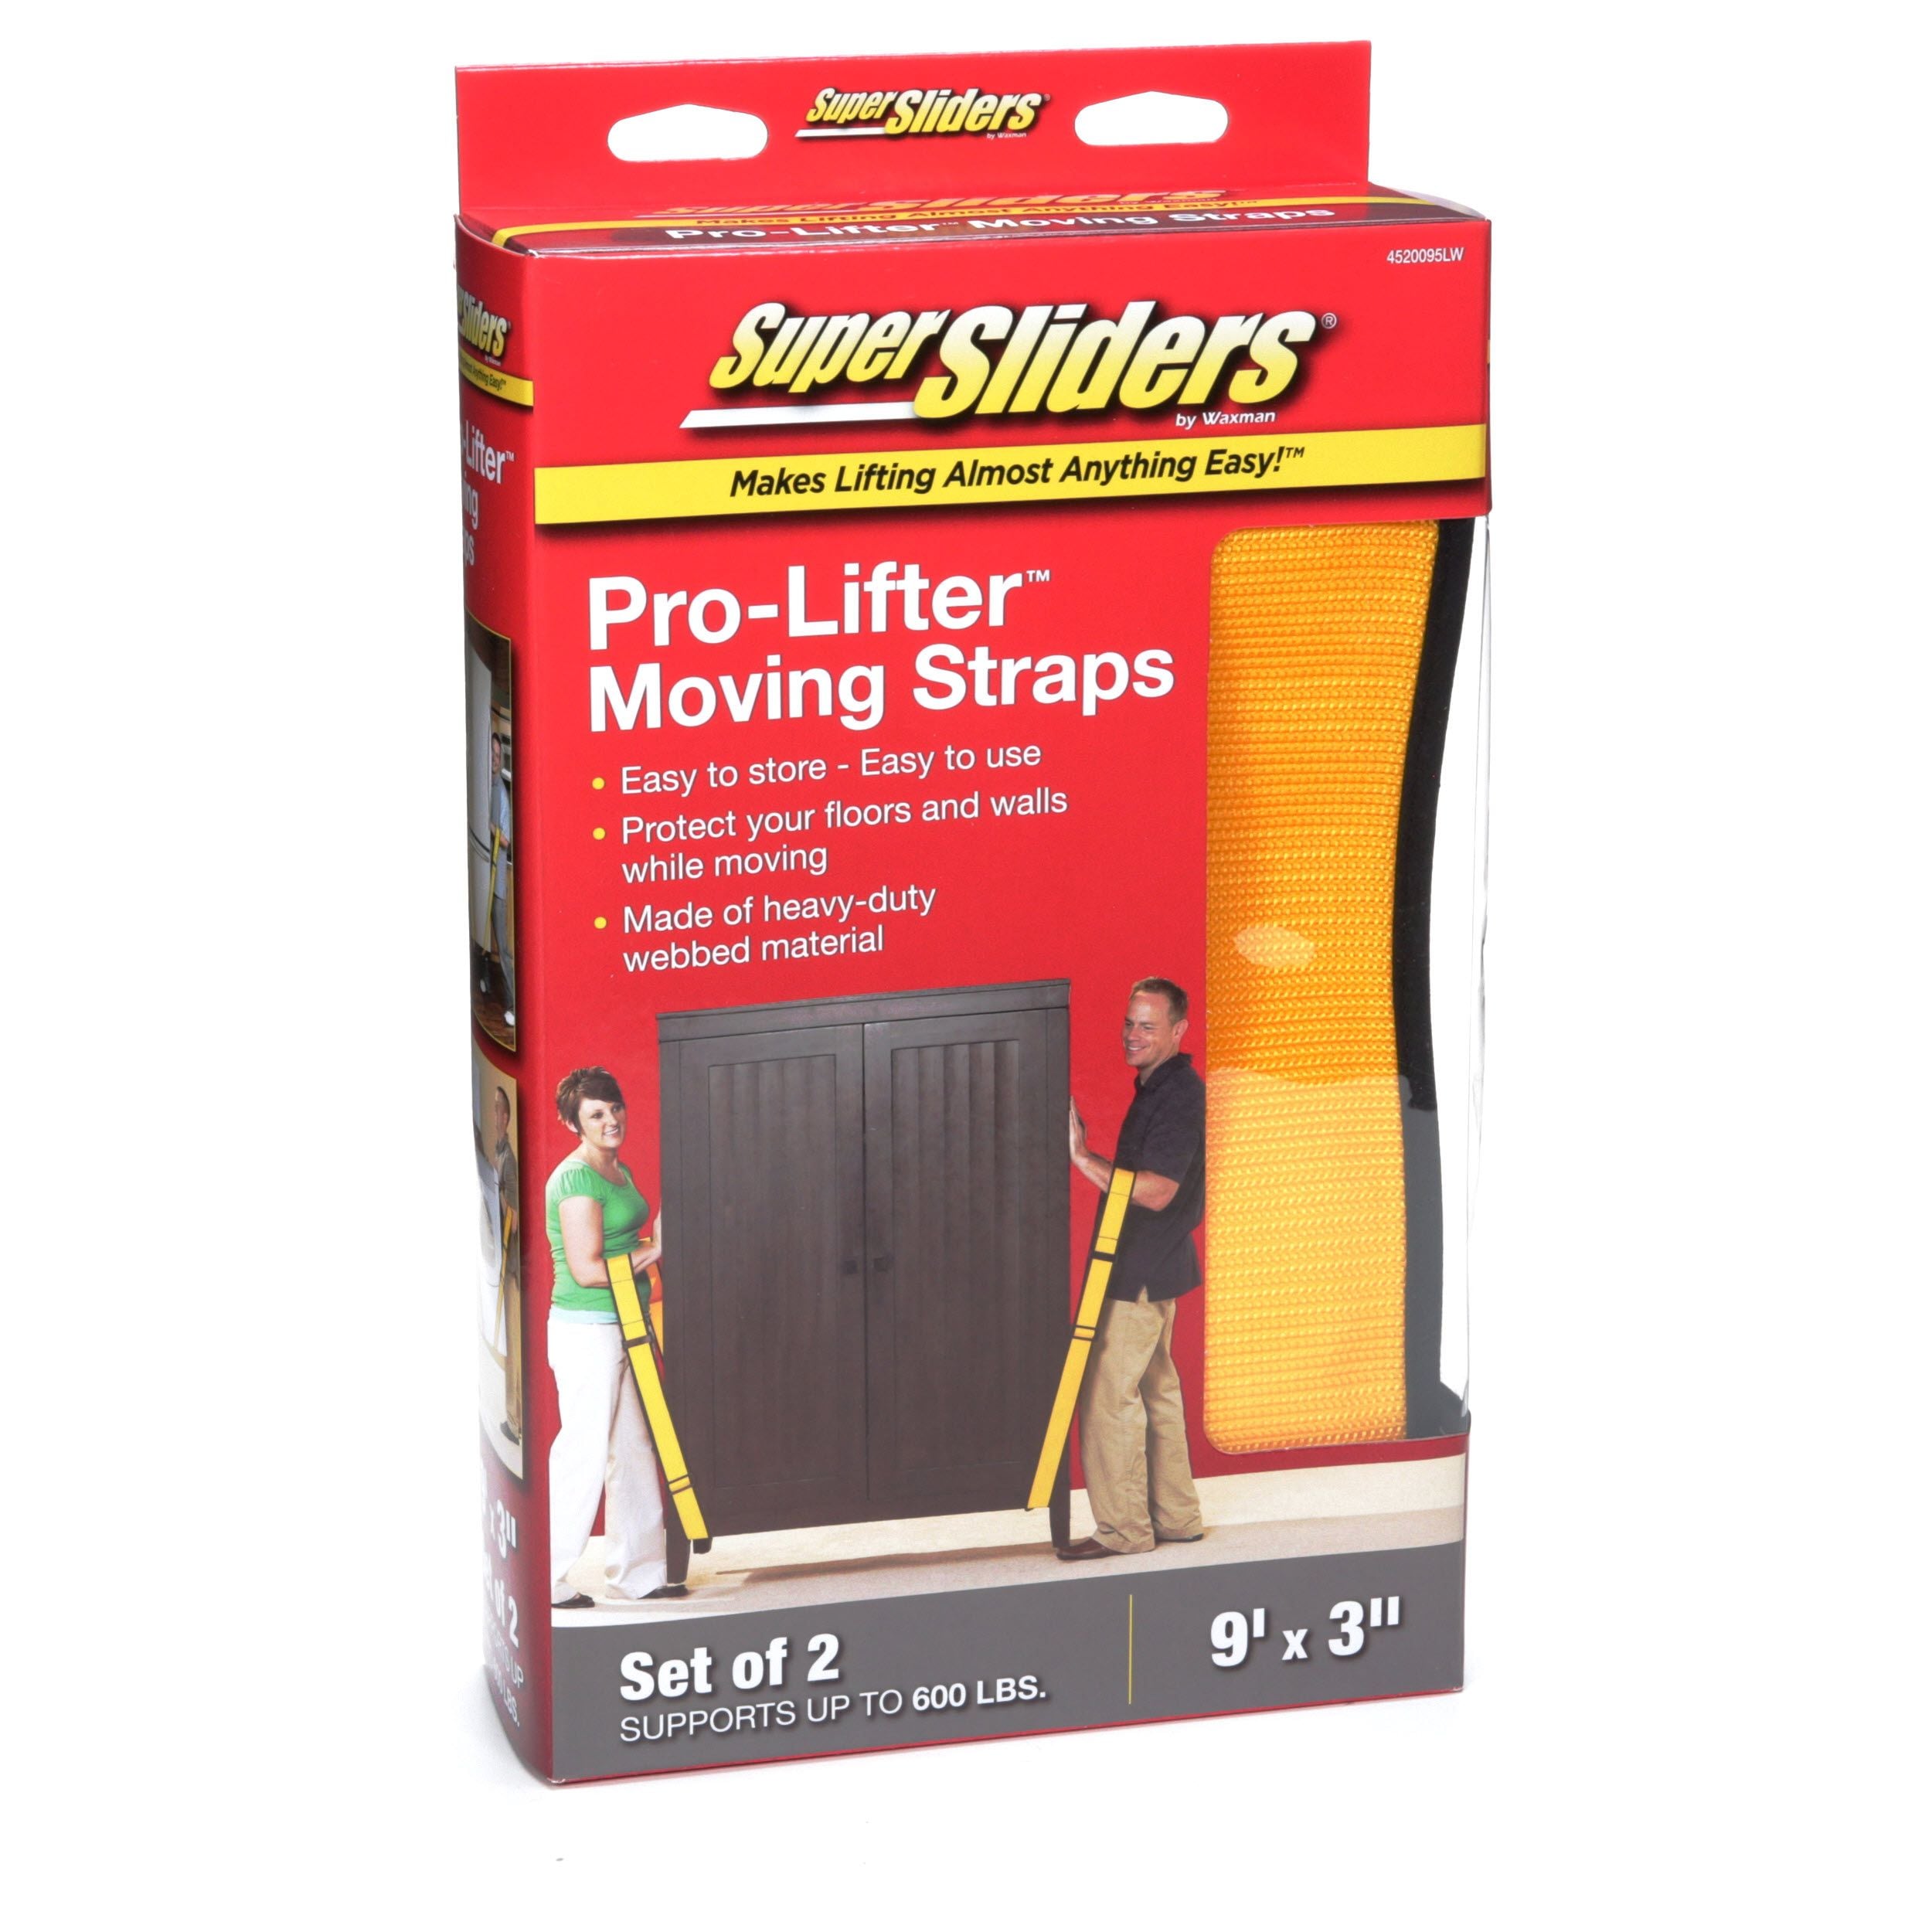 SuperSliders Pro-Lifter Moving and Lifting Straps Waxman 4520095N 